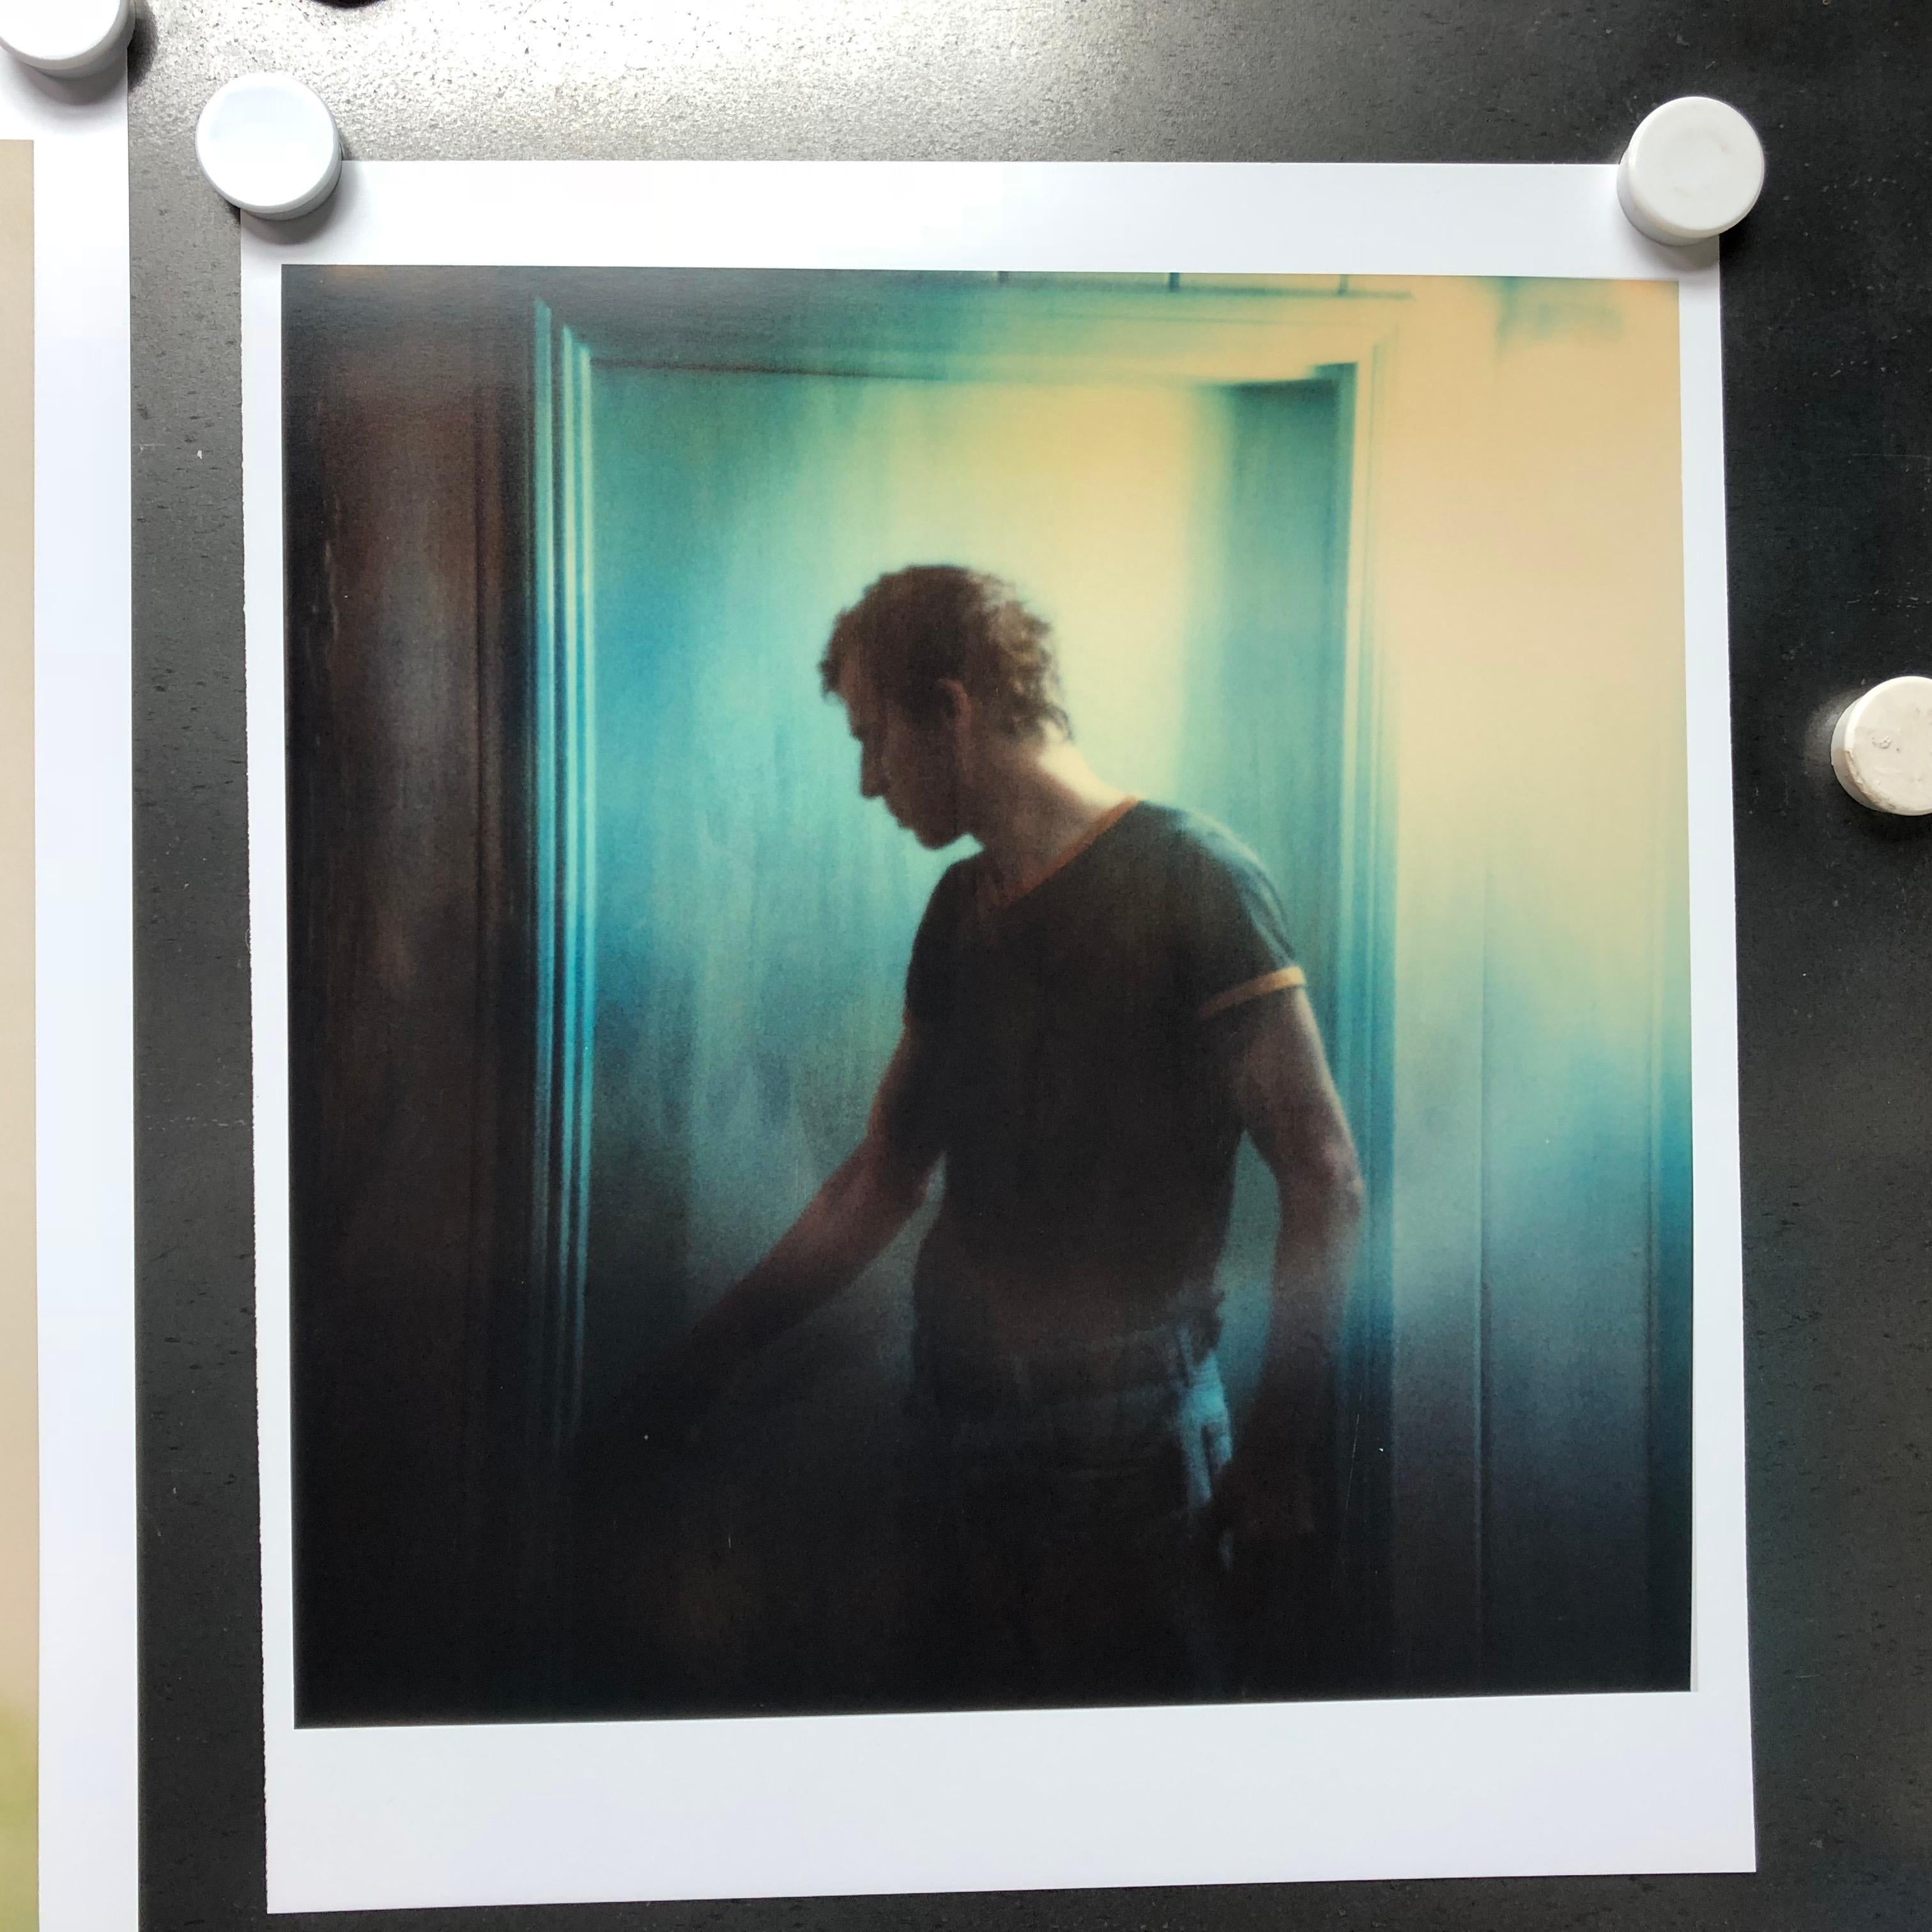 Lou Reed - Contemporary, Figurative, Polaroid, Photograph, 21stCentury, Expired - Black Figurative Photograph by Stefanie Schneider